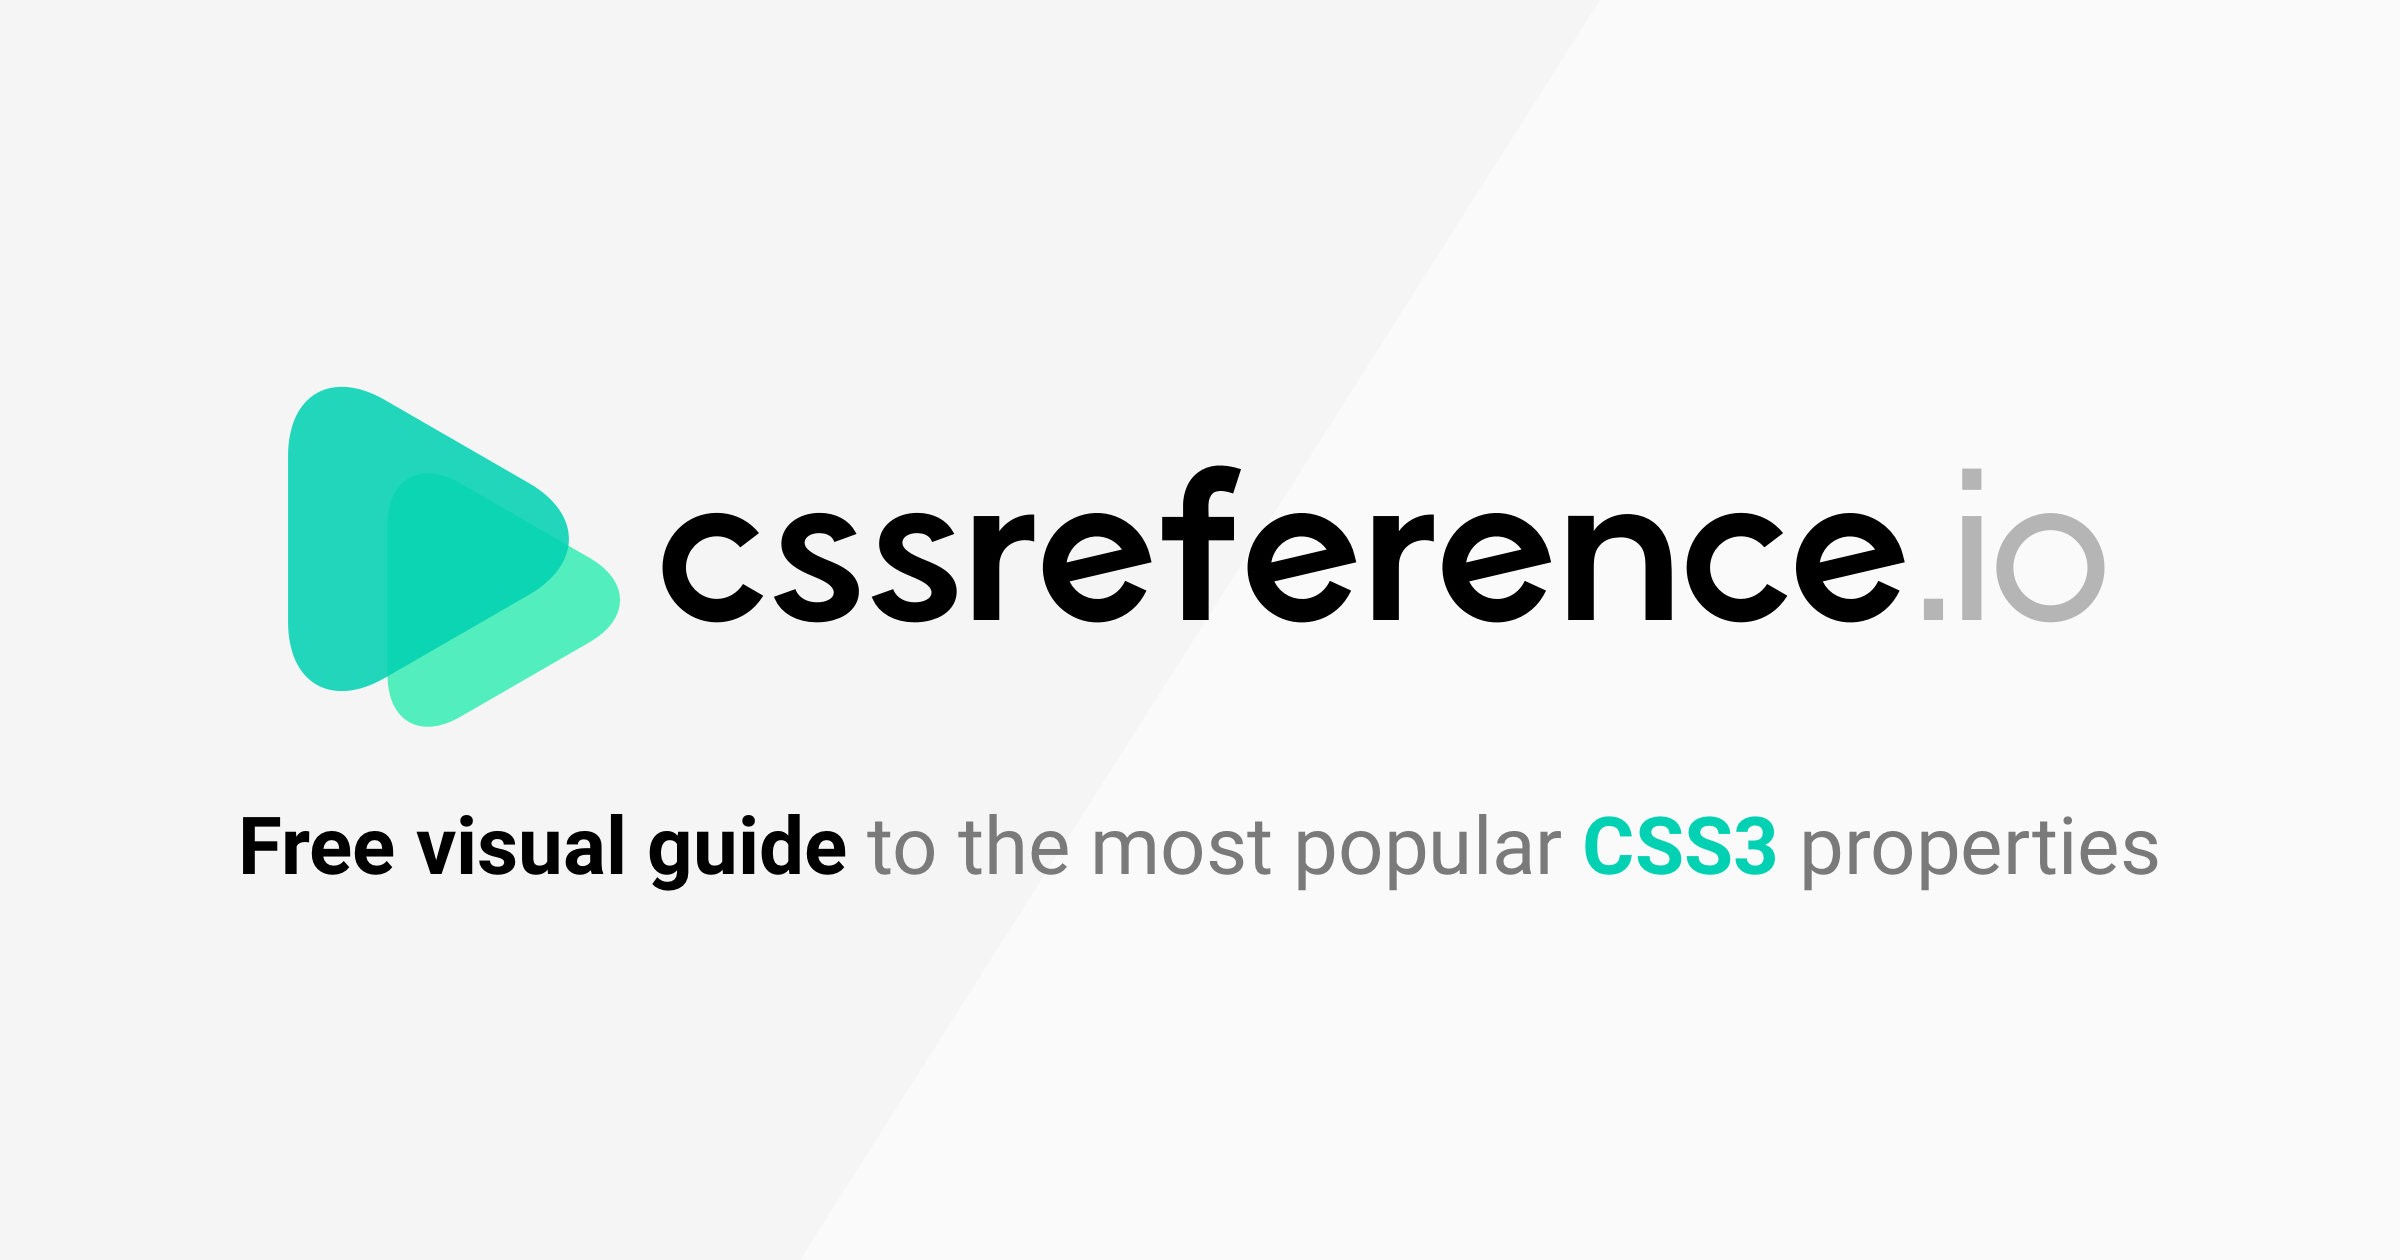 Reference.com Logo - CSS Reference free visual guide to CSS